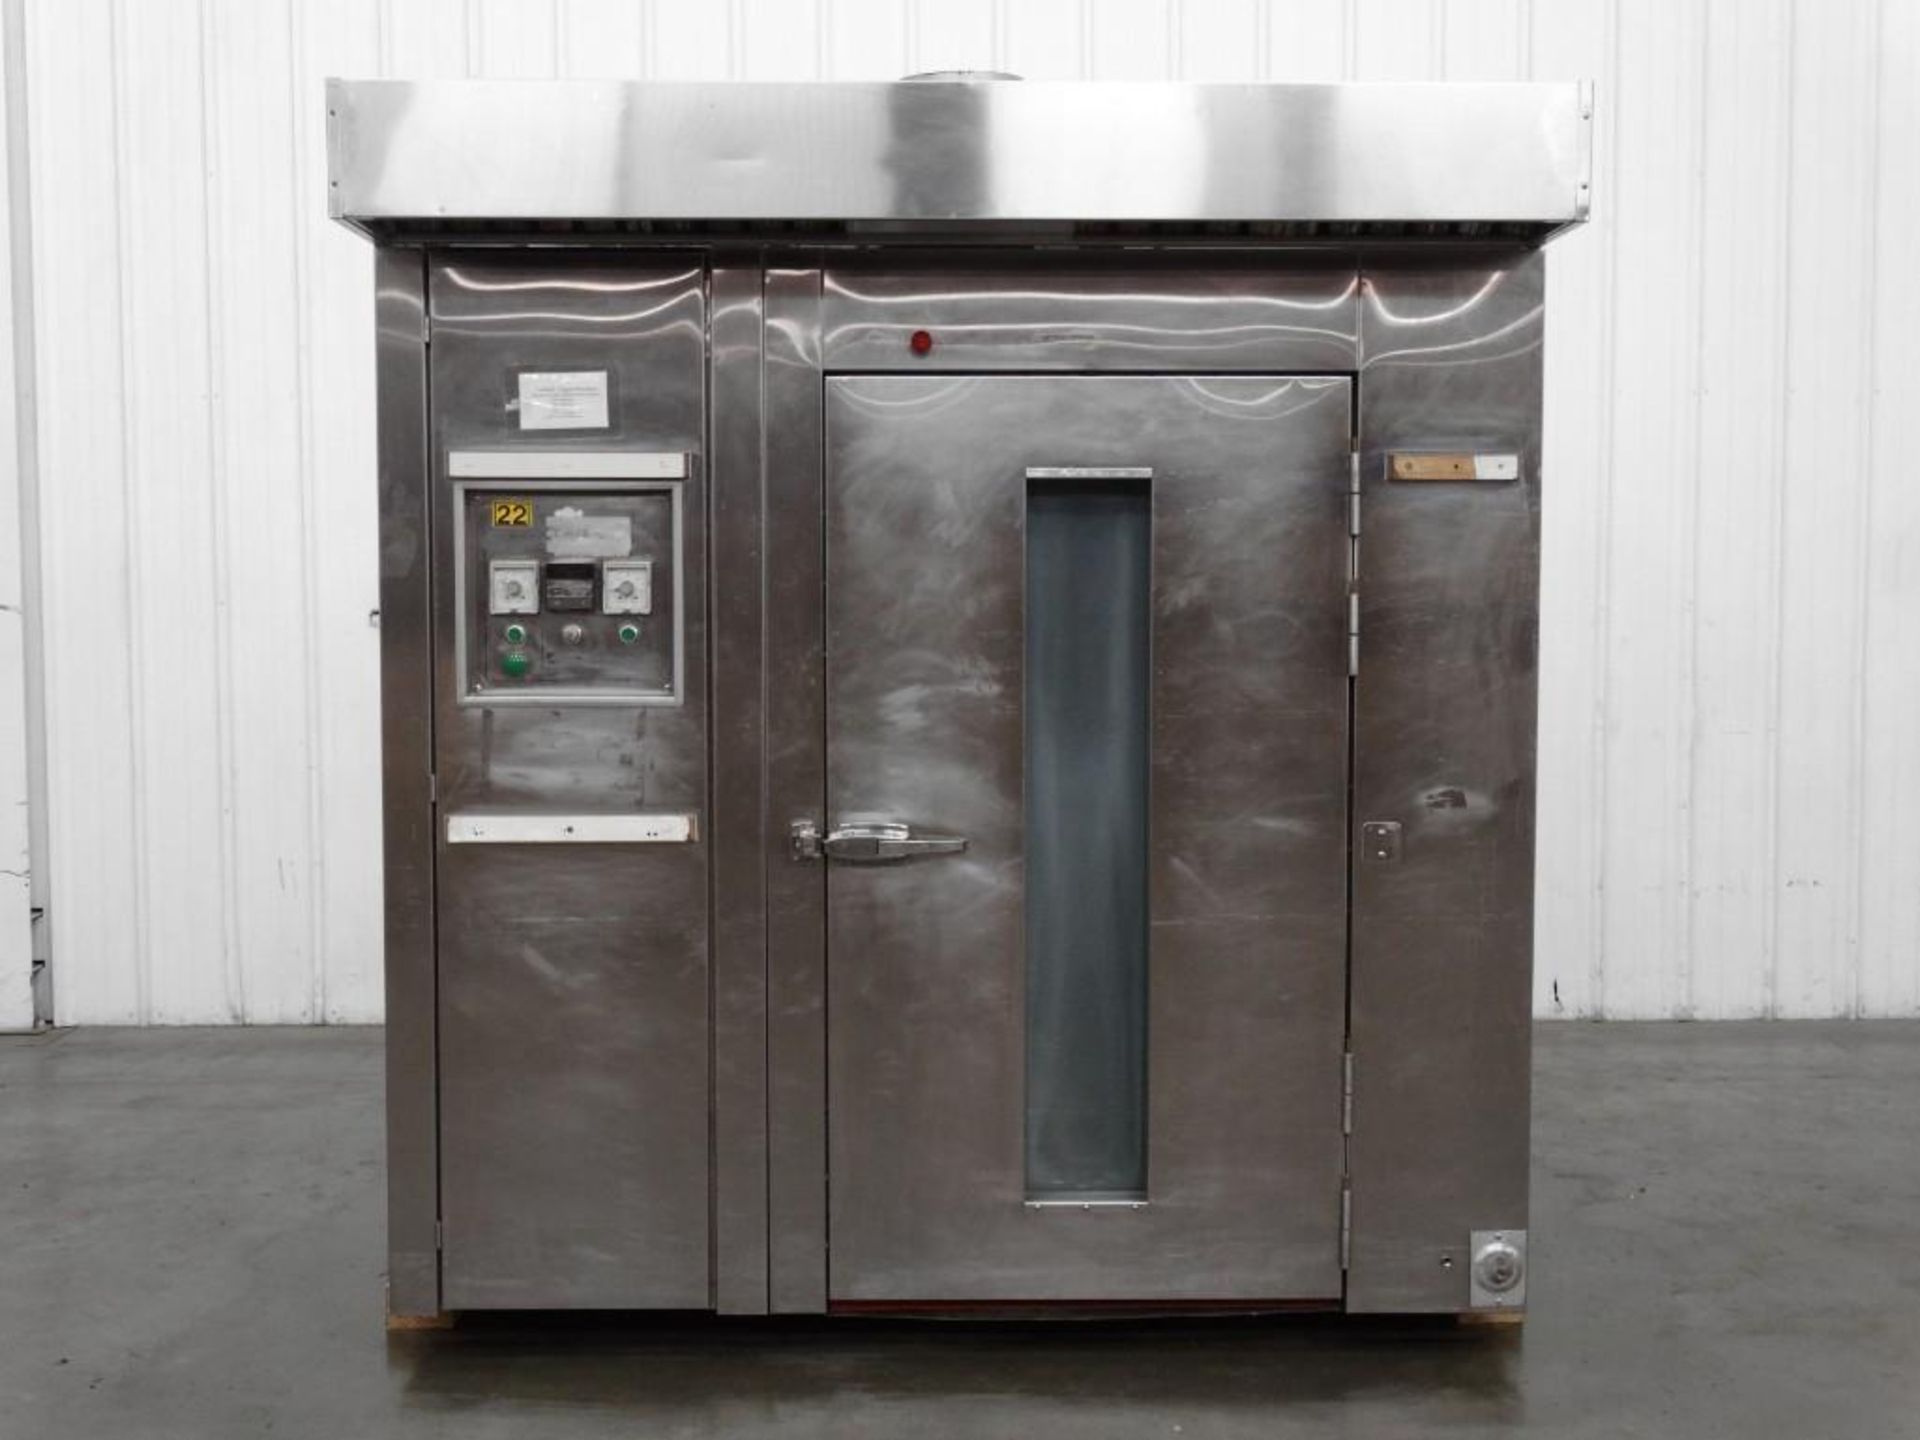 Baxter OV200G-M2 Double Rack Oven - Image 2 of 11